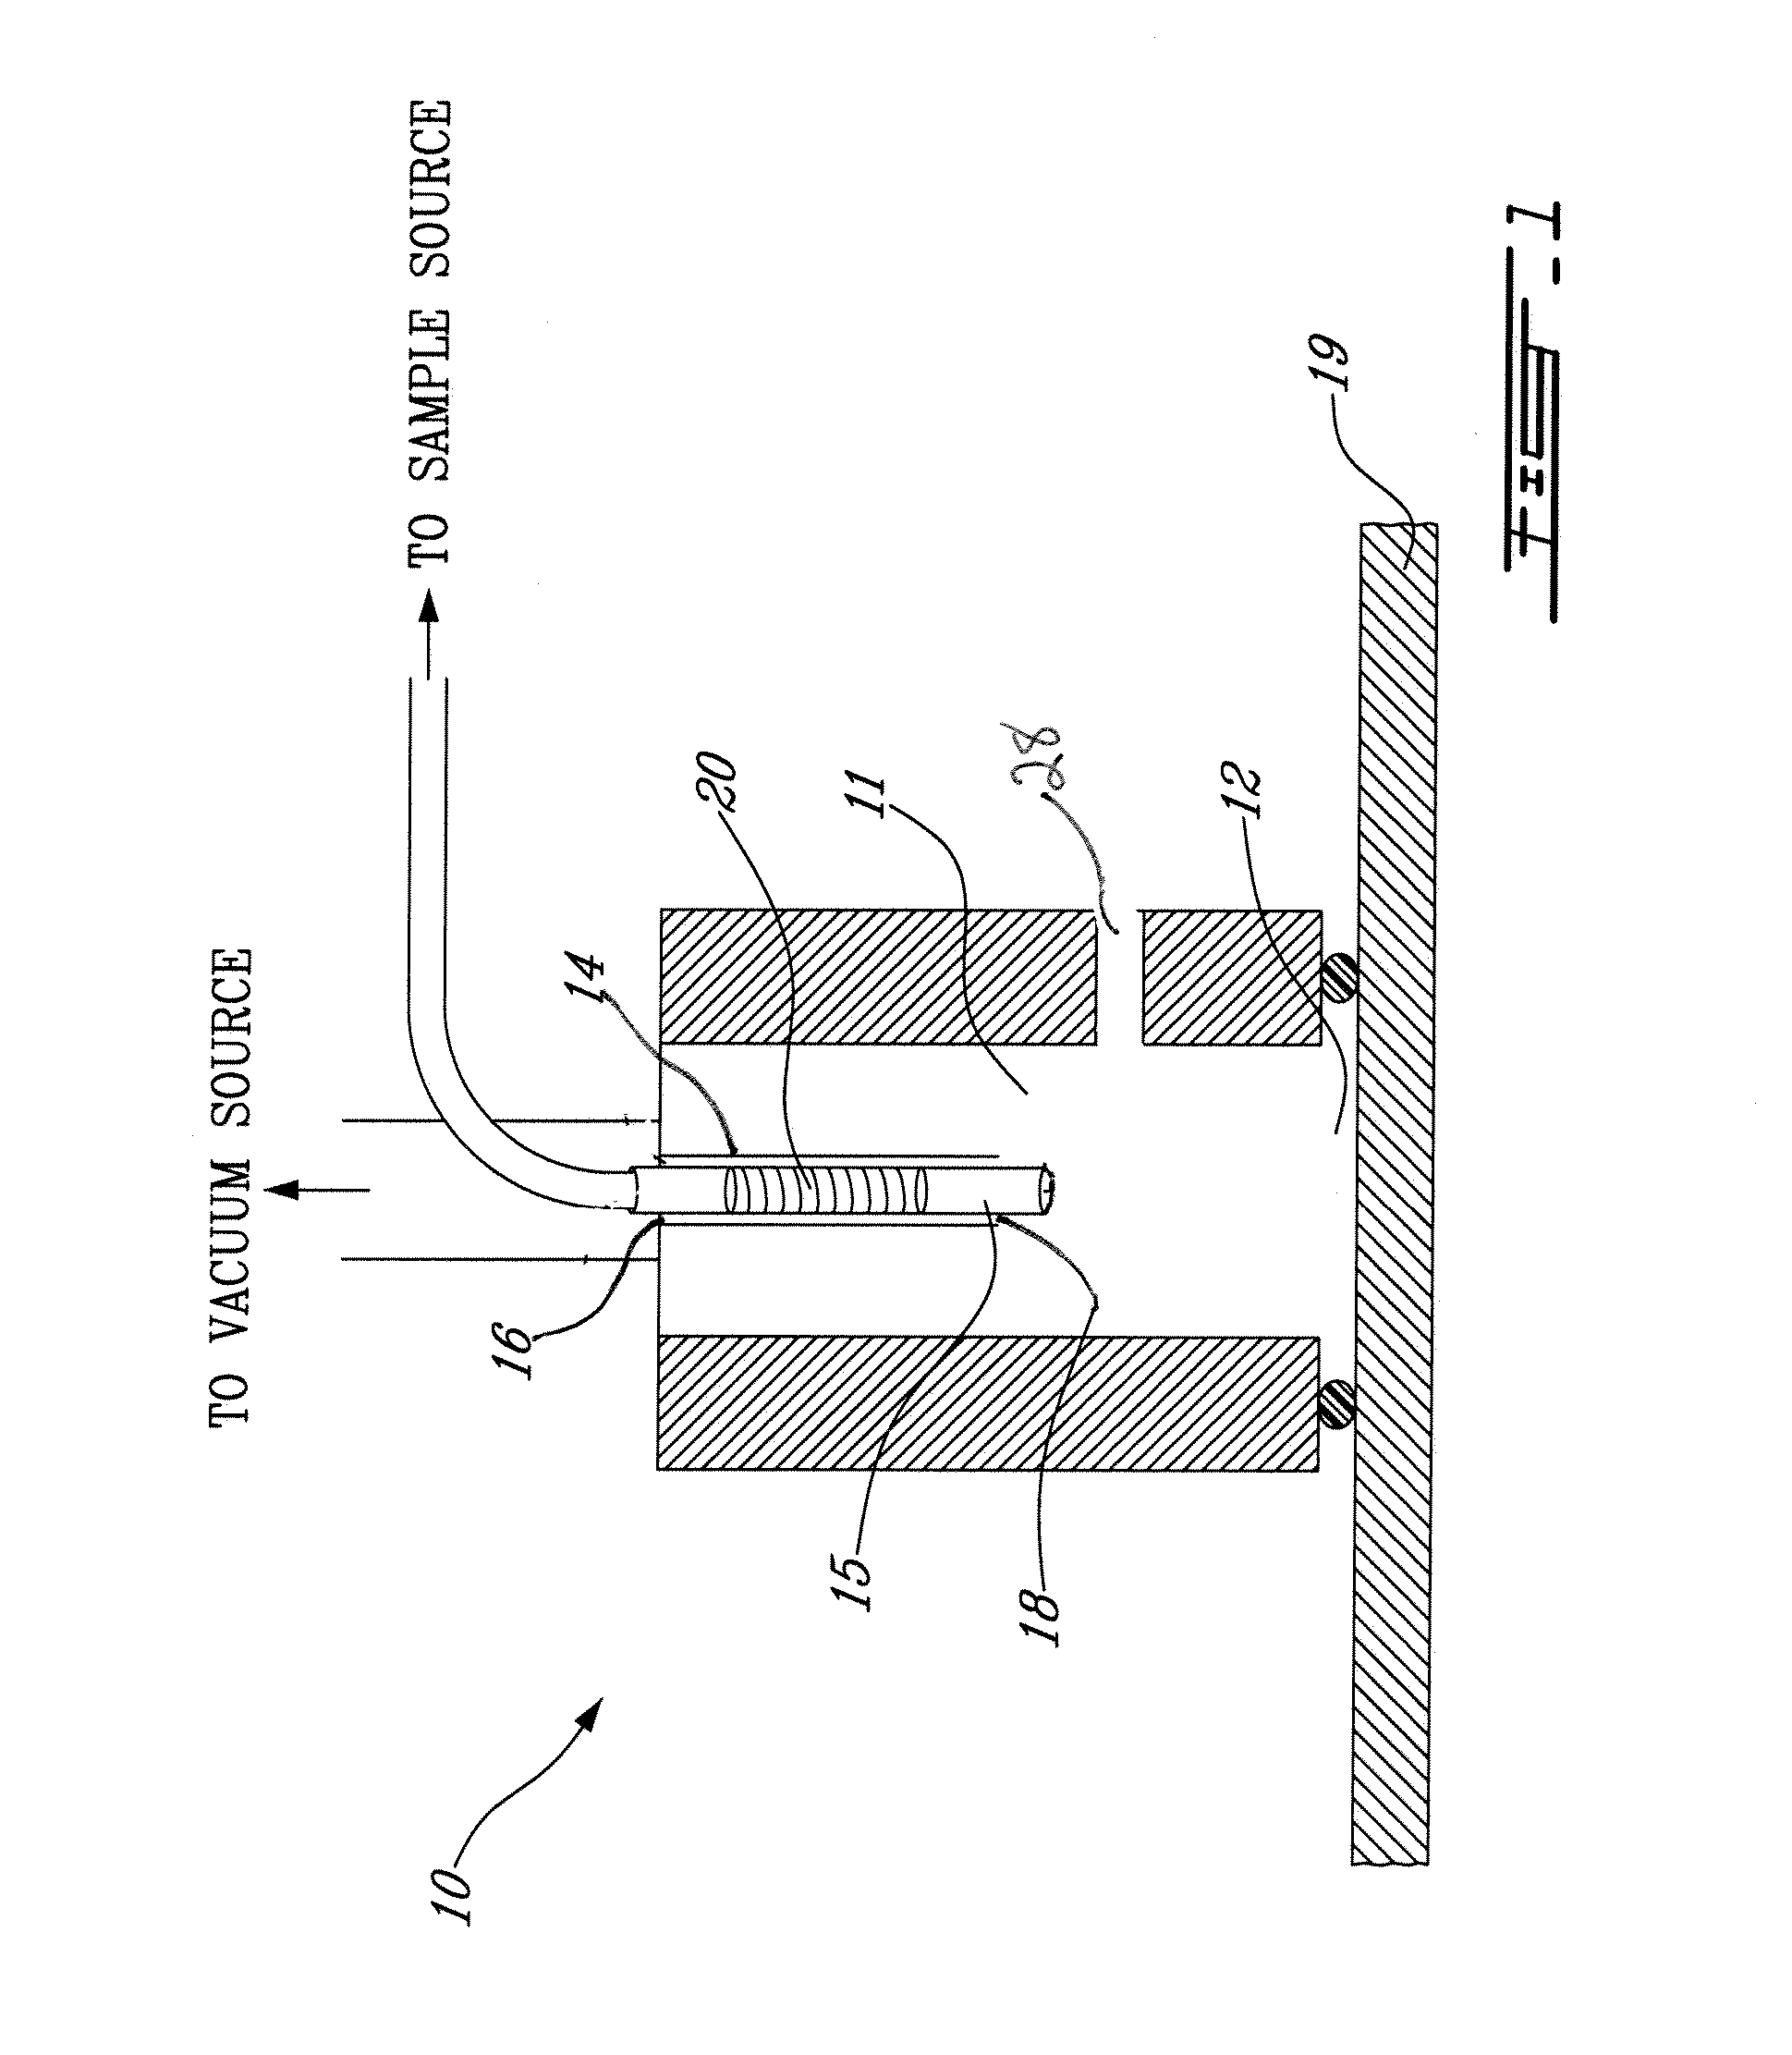 Method and apparatus for depositing samples on a target surface